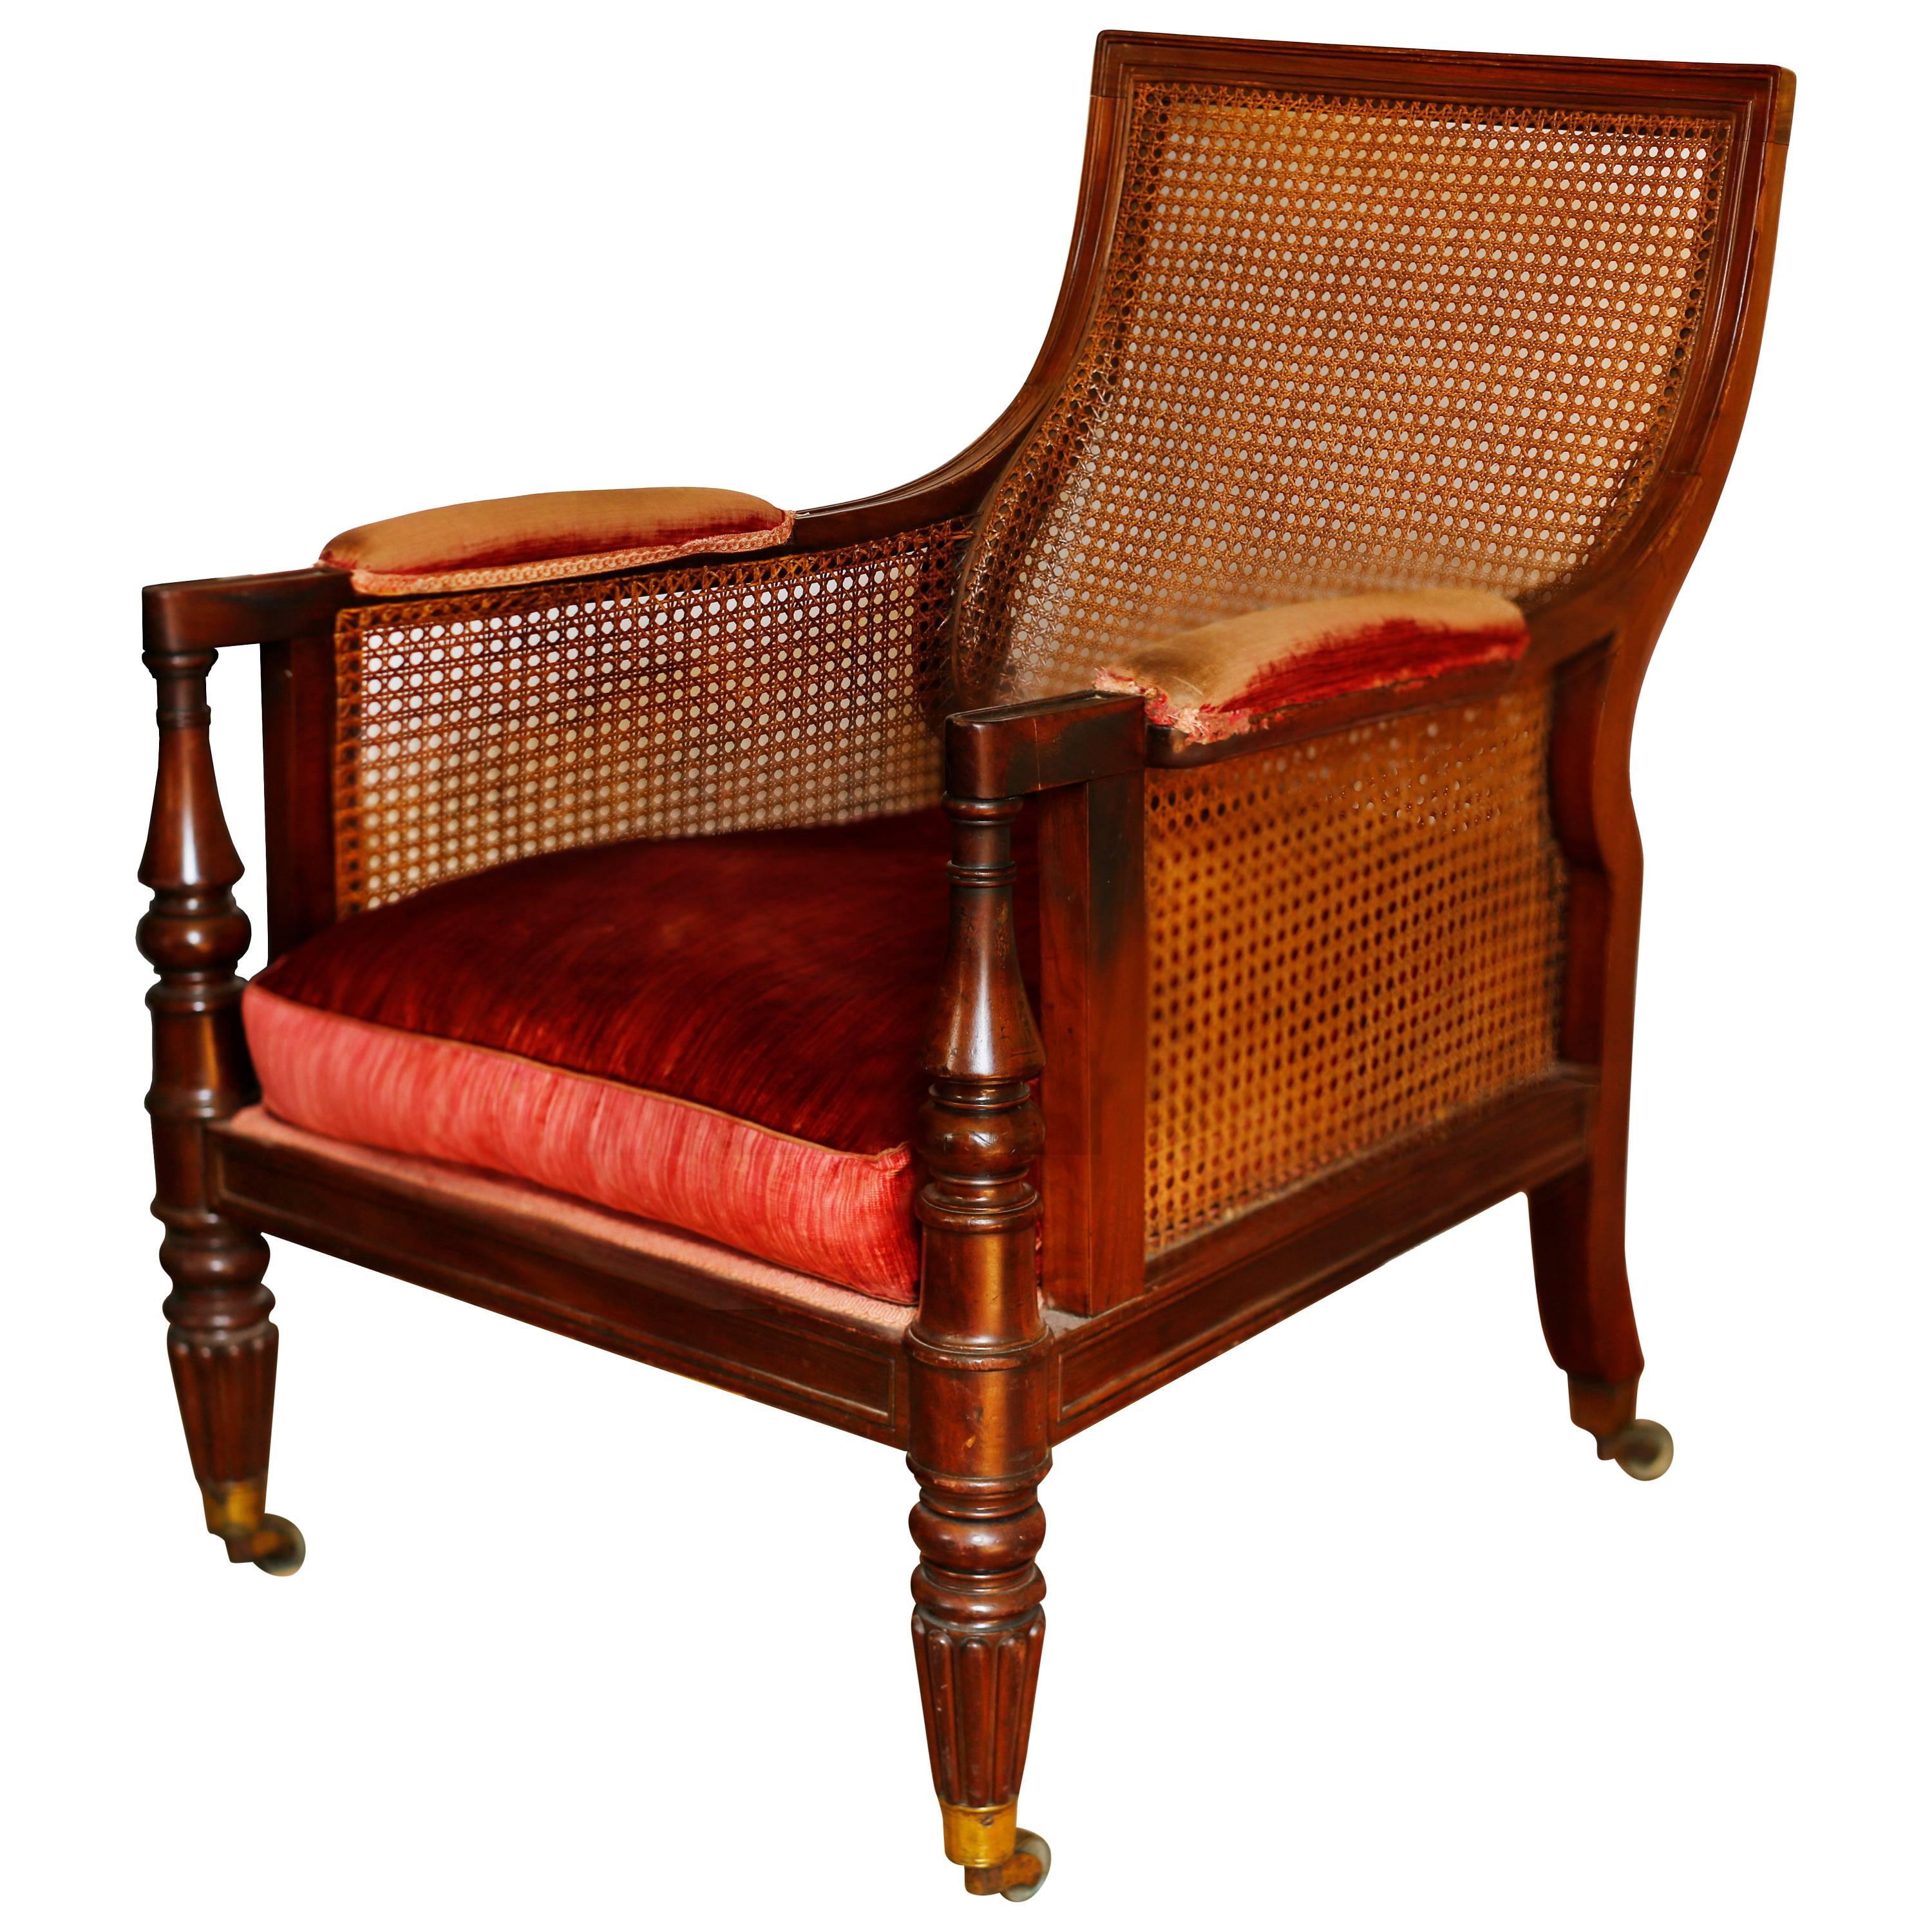 Early 19th Century Caned Bergere attributed to Gillows